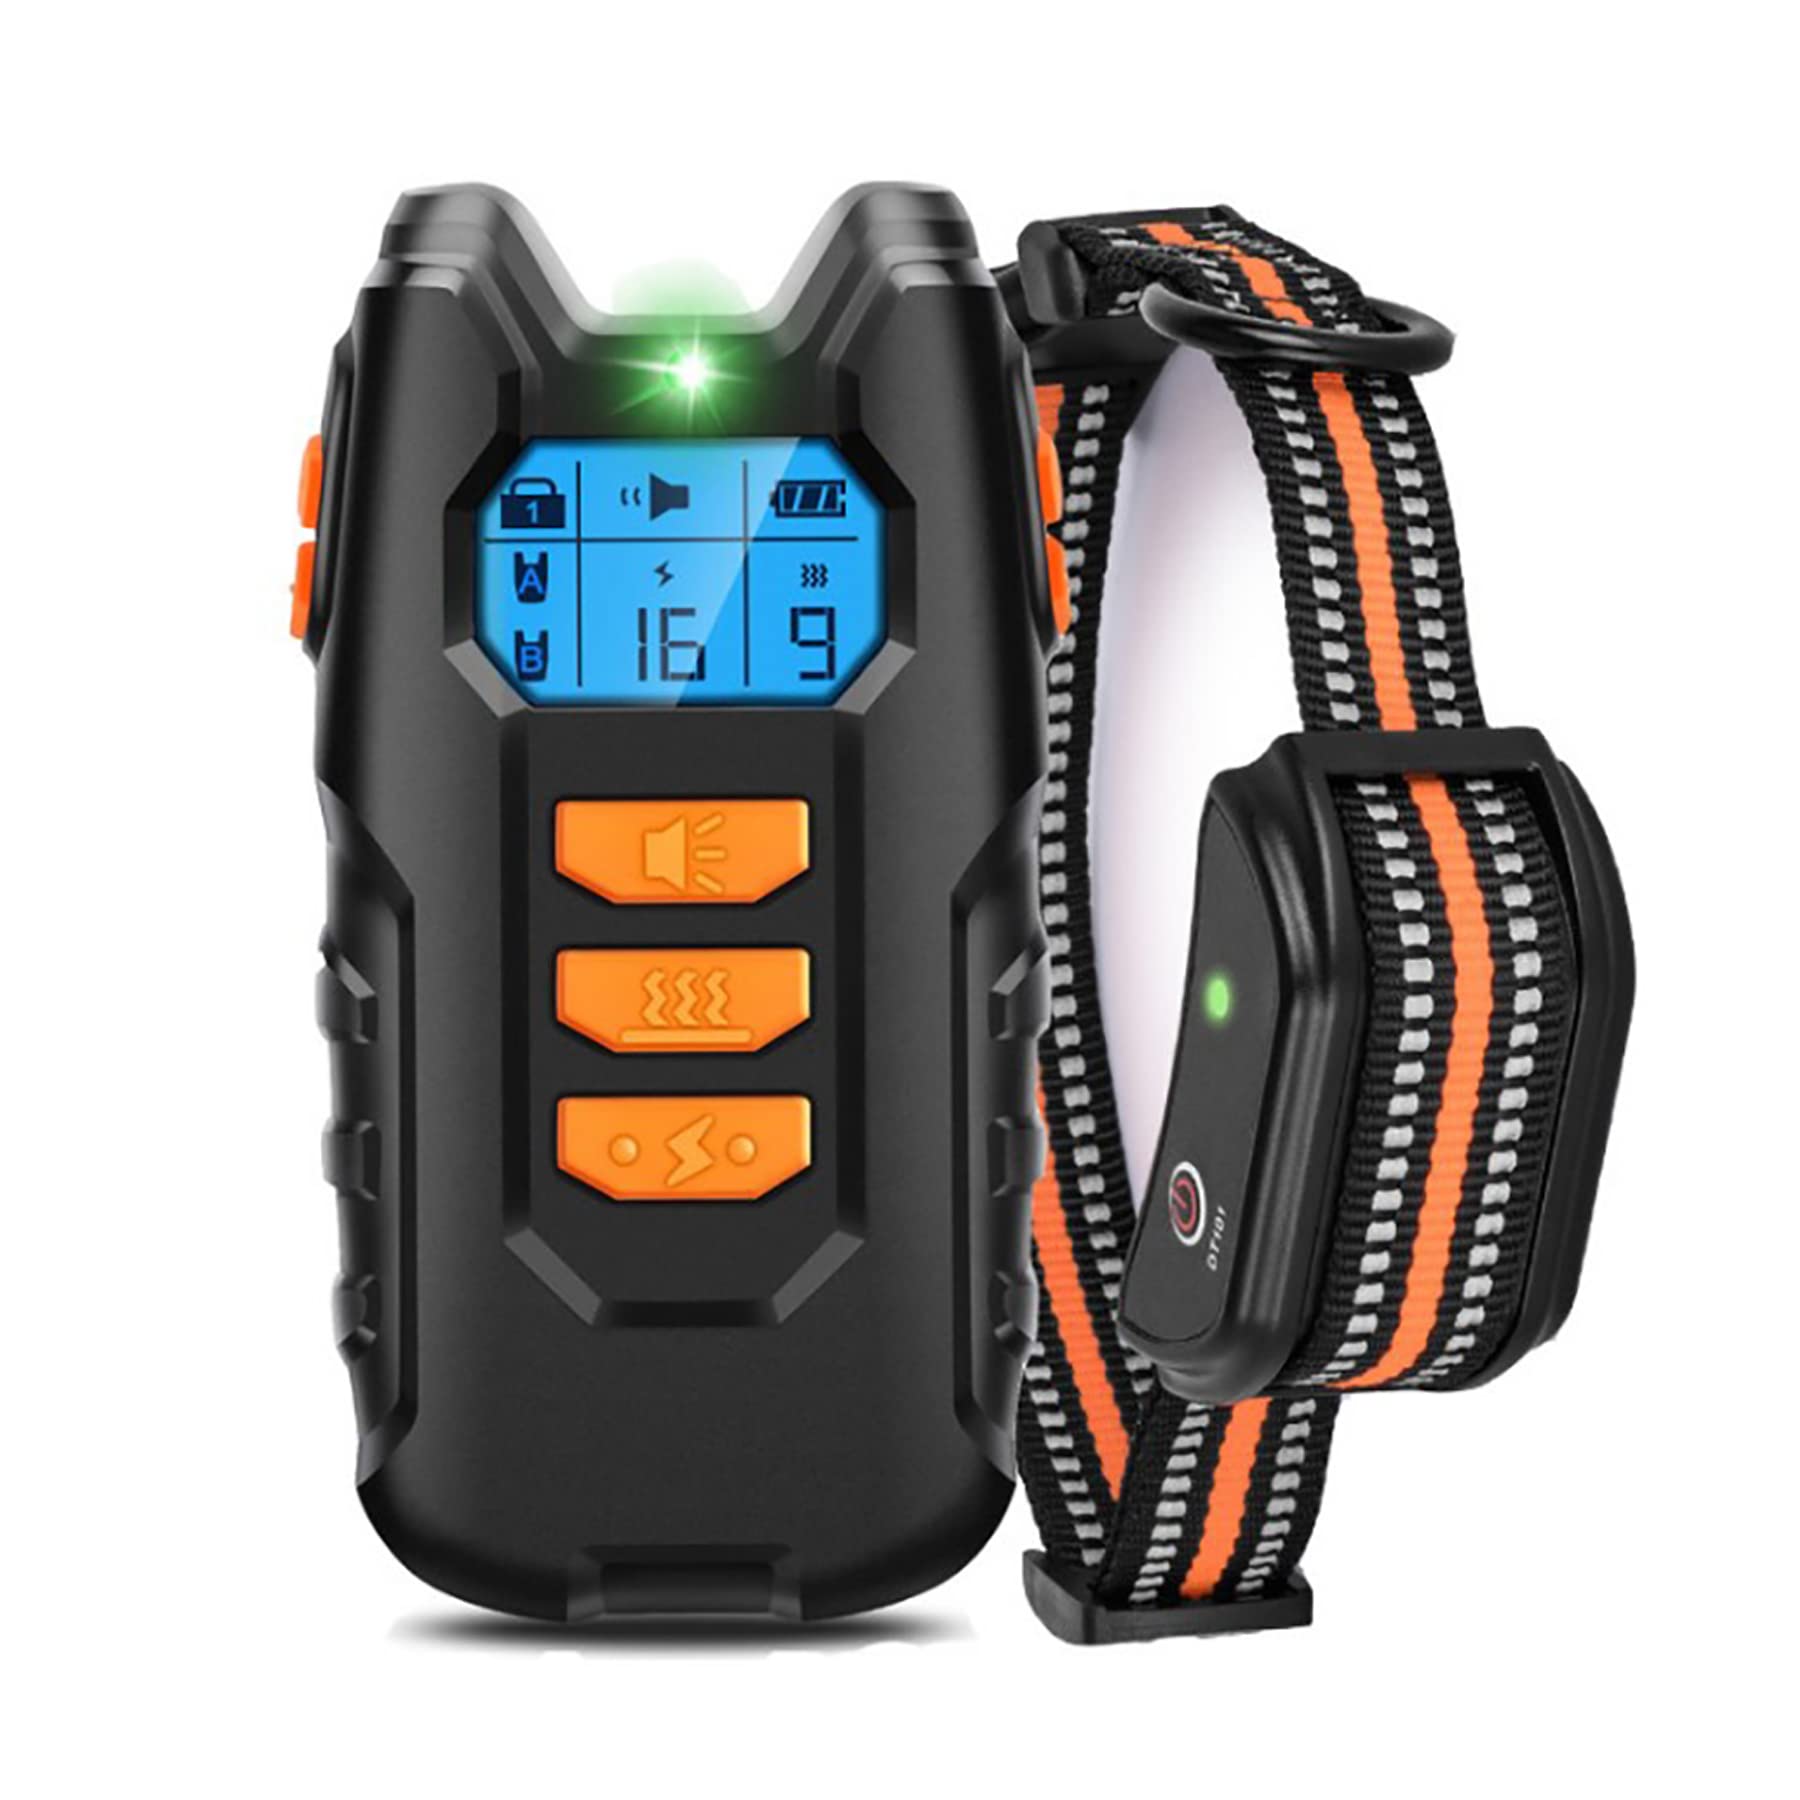 Only Warm Dog Training/Shock Collar with Remote Waterproof for Dog Range 1640 ft/500 Meter, 3 Training Modes, Beep, Vibration and Shock fo